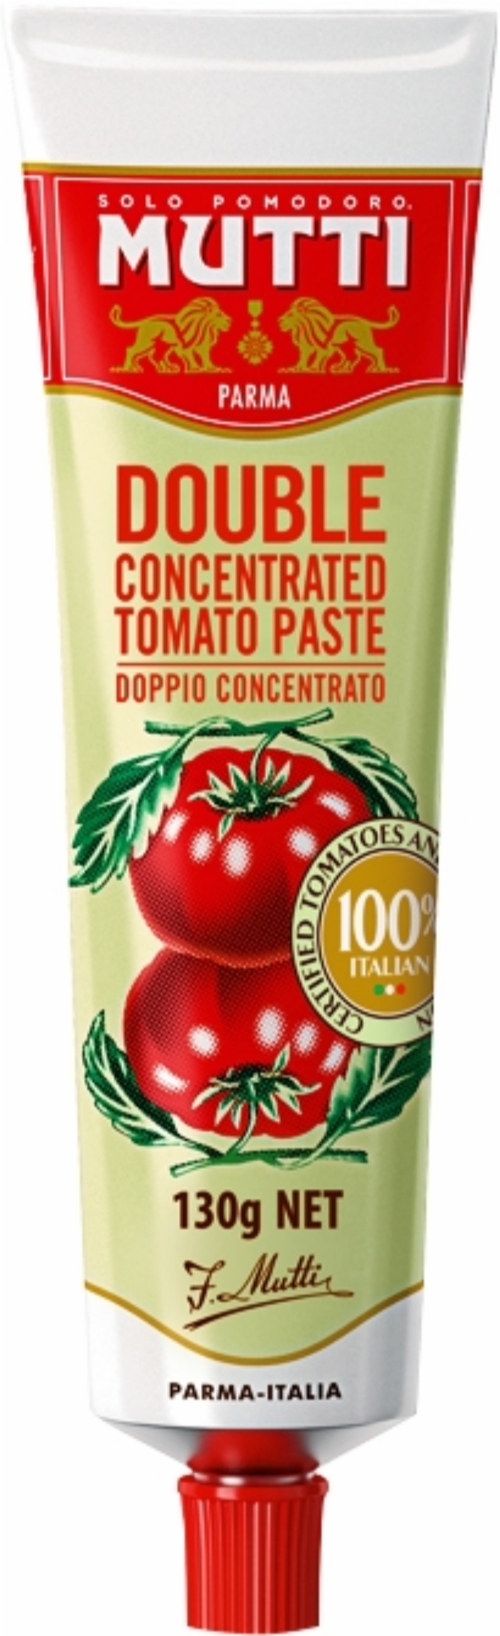 MUTTI Double Concentrated Tomato Paste 130g